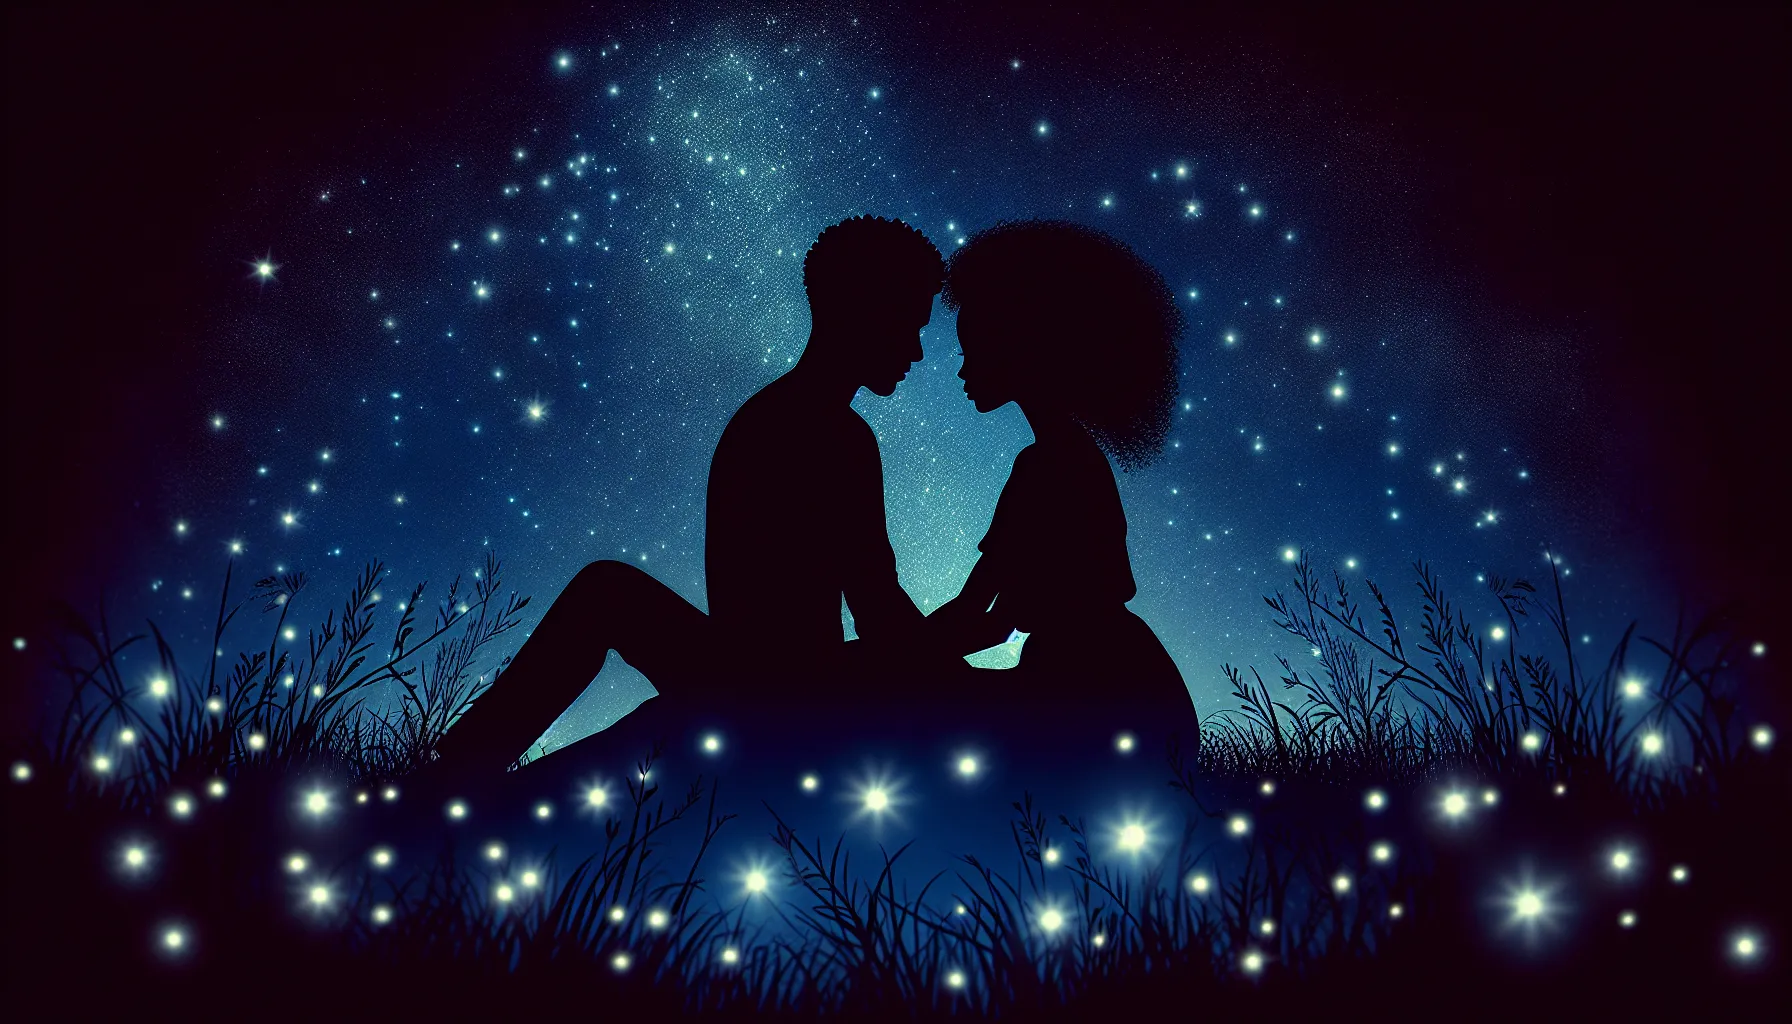 Beneath the celestial theatre of a summer's night, a couple finds solace in the silent conversation of their gaze, their bond a constellation of moments as timeless and radiant as the stars overhead.